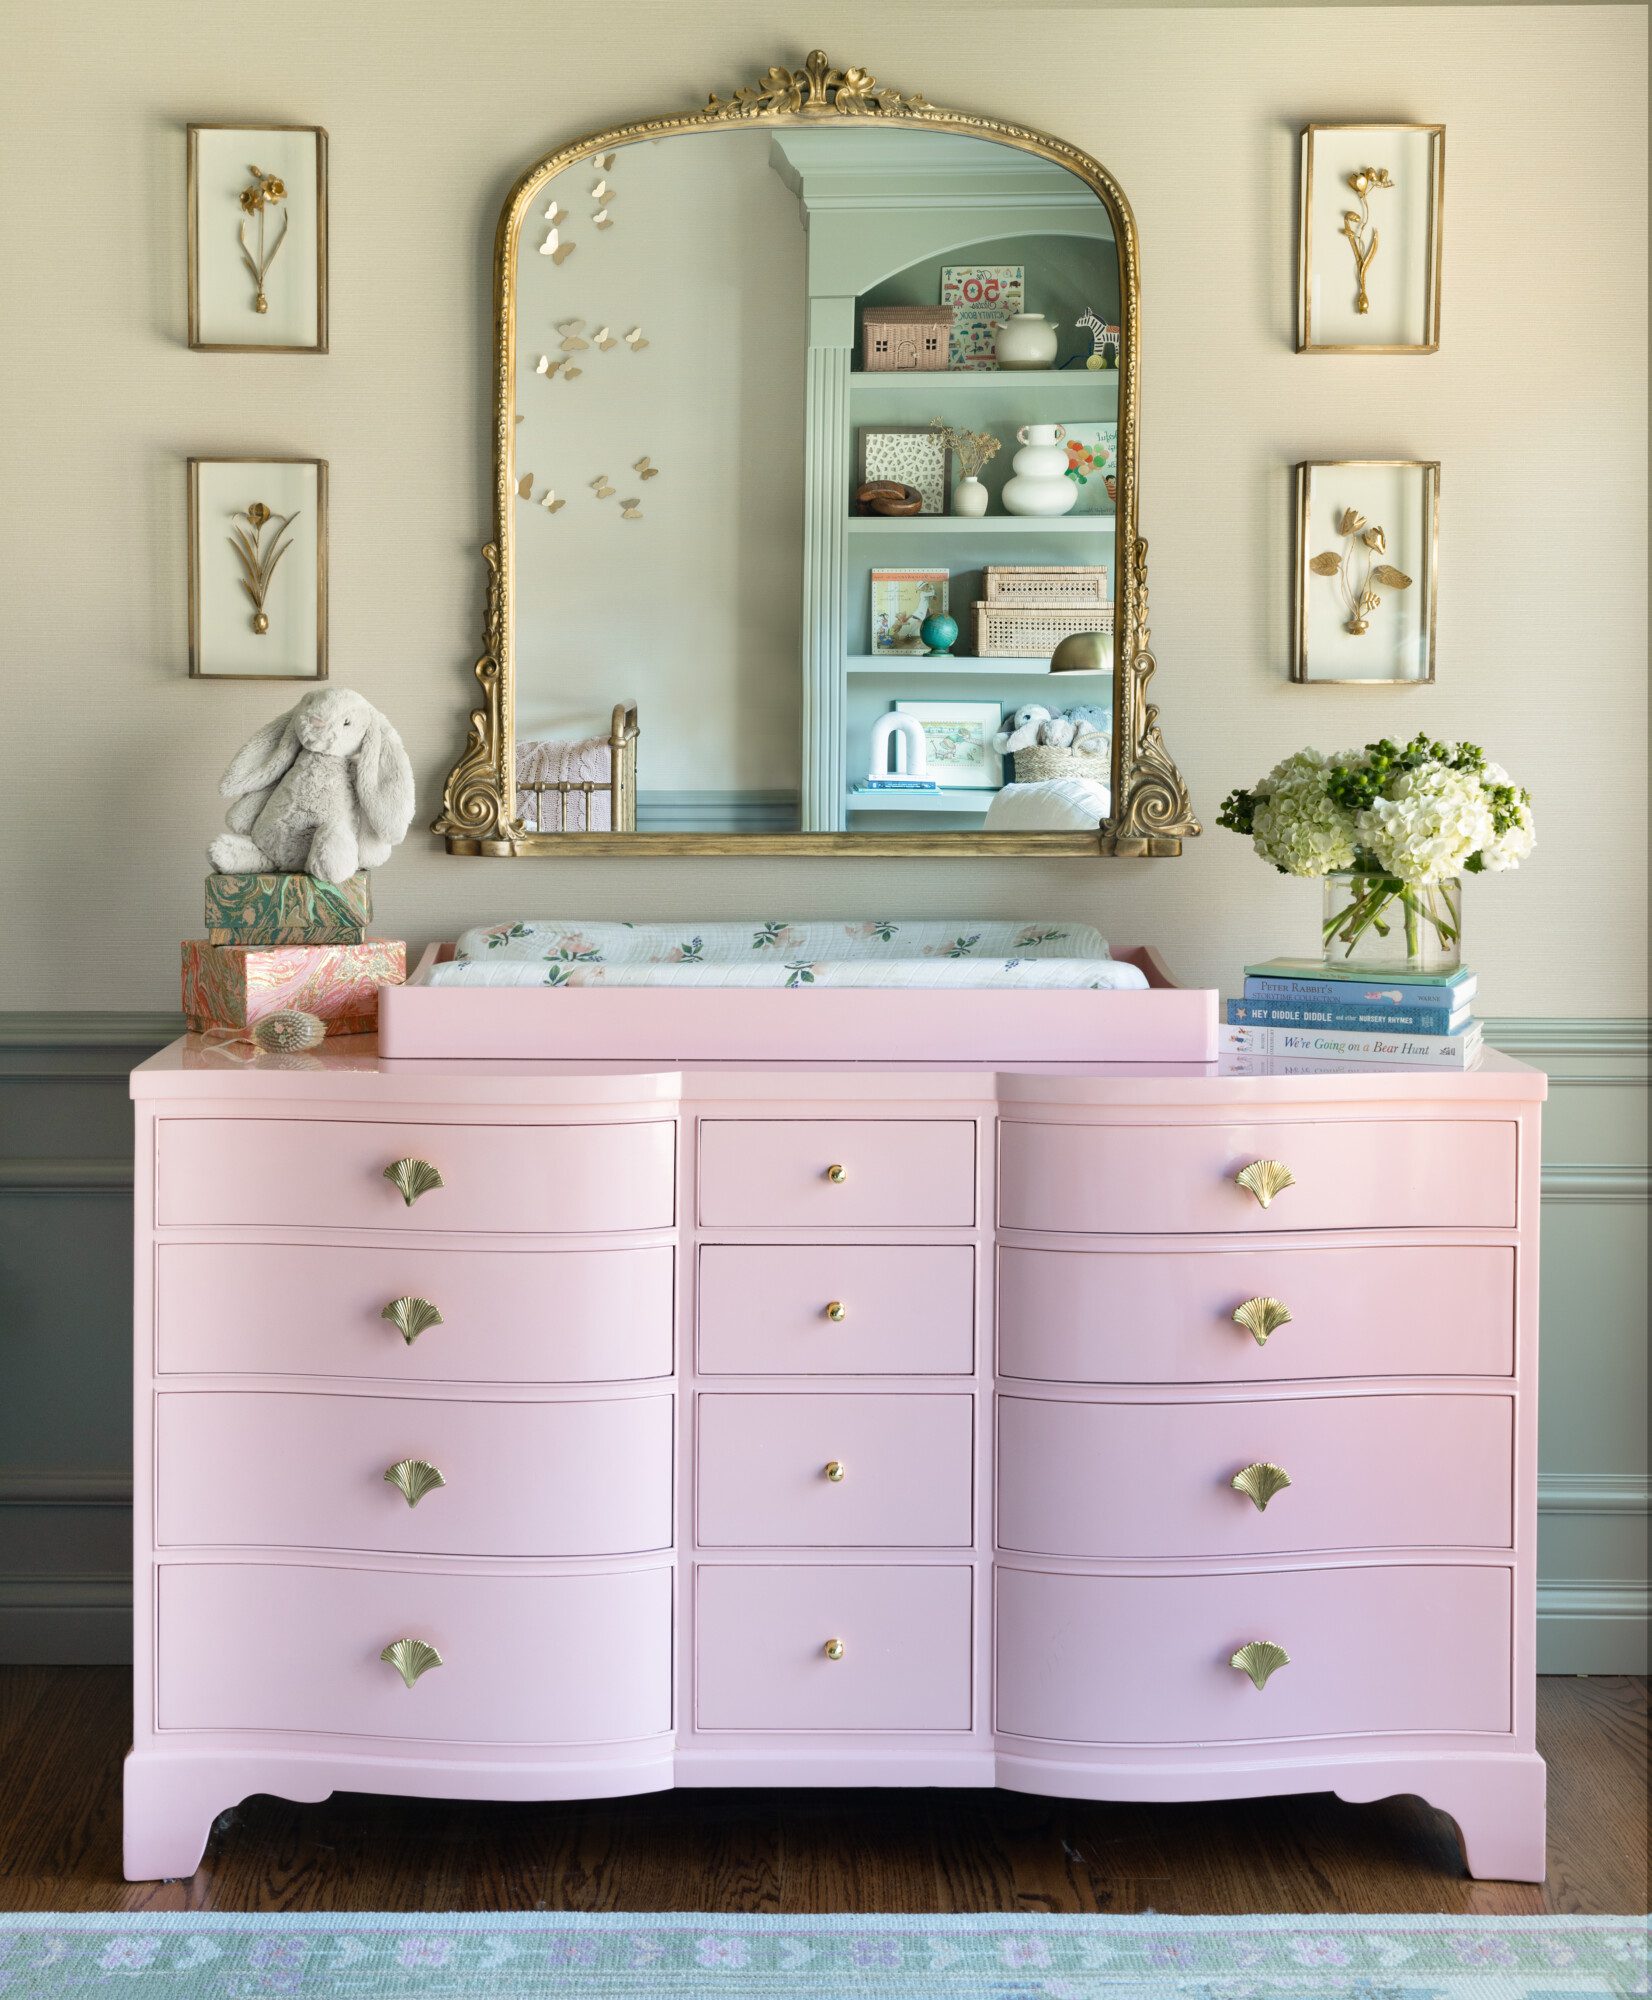 A sweet pink dresser with a gold antiqued mirror